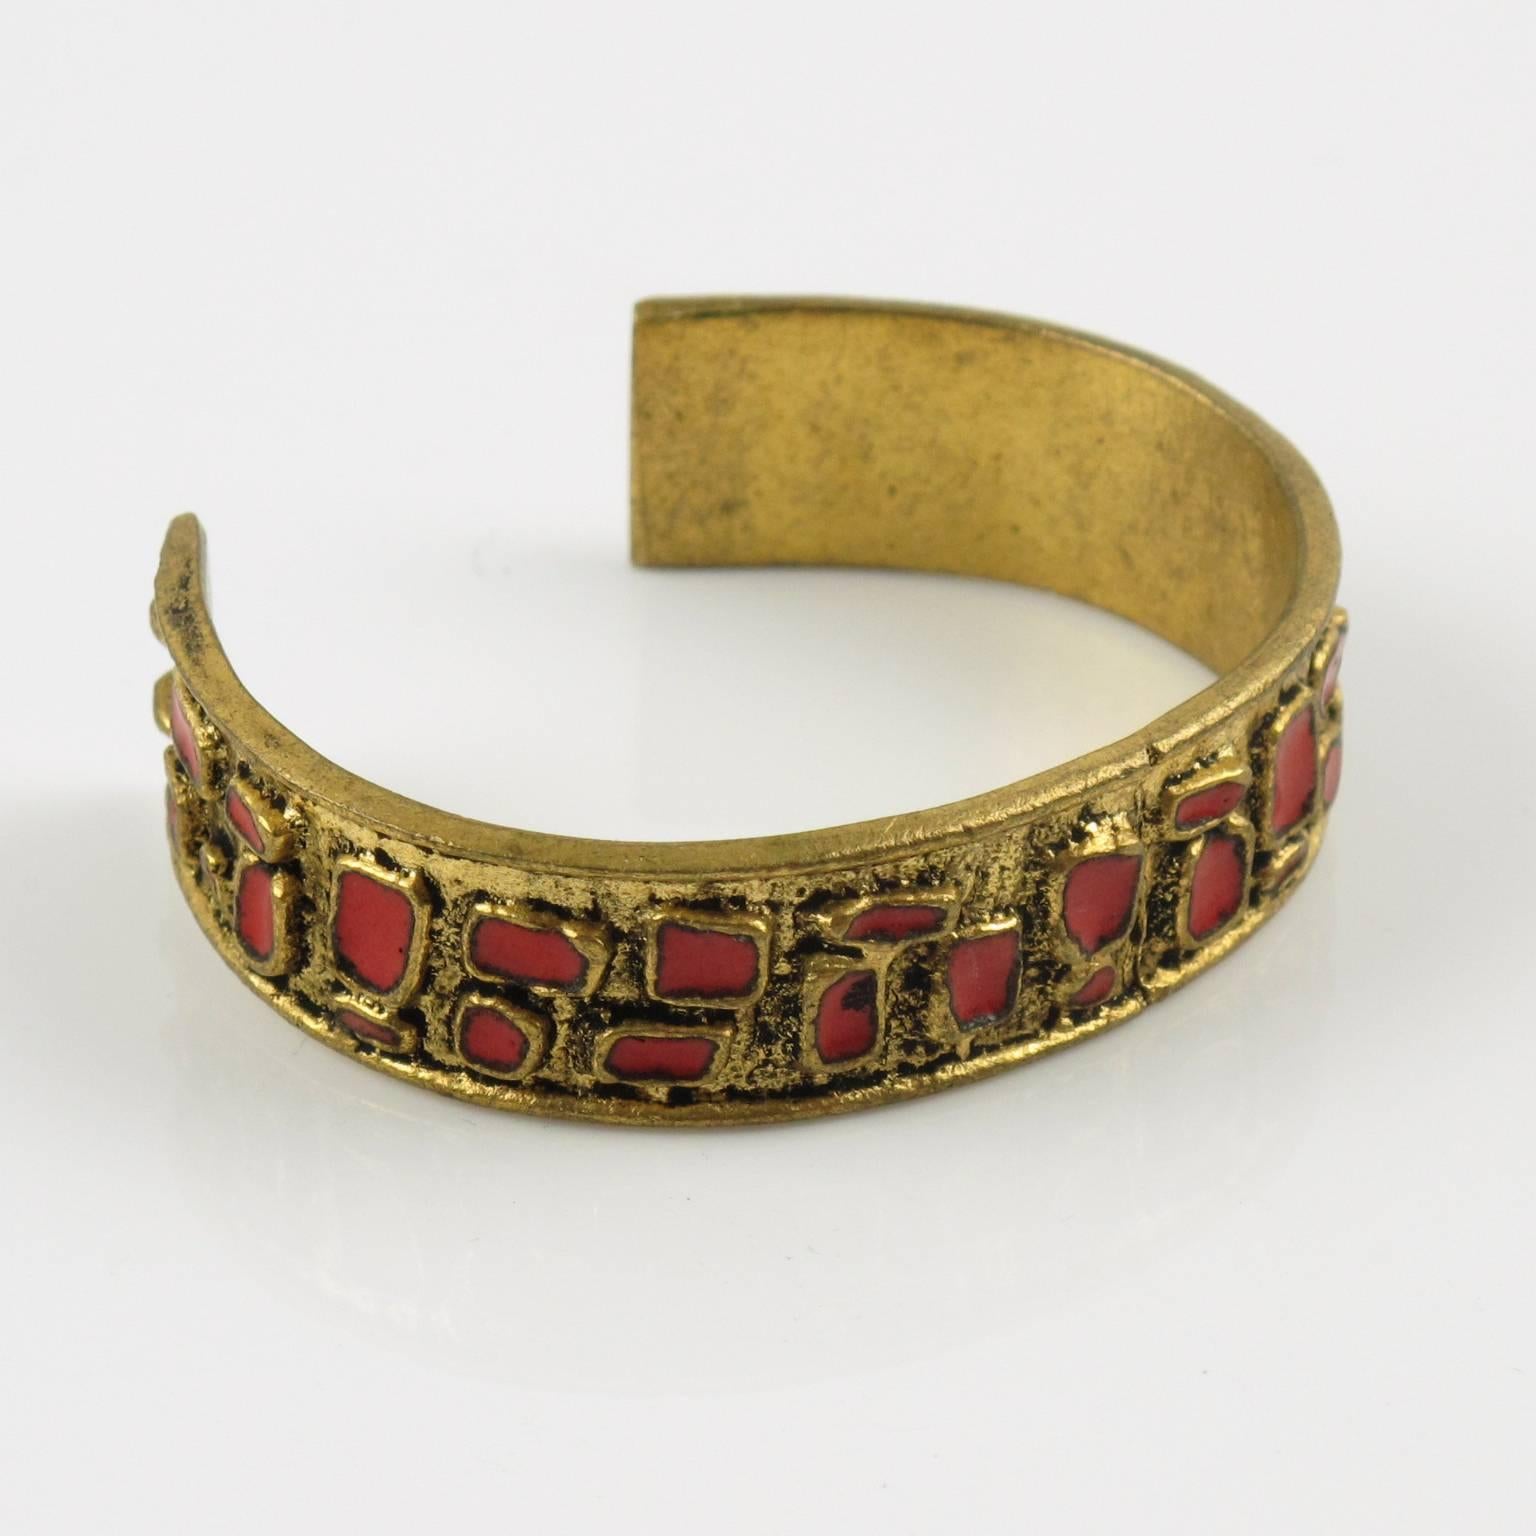 Rare Mid-Century modern bronze cuff bracelet. Gilt bronze band topped with geometric design ornate with bright red enameling. 
Measurements: Inside across = 2.32 in. x 1.75 in. (5.9 x 4.5 cm) - Opening = 1.44 in. (3.6 cm) - Band width = 0.63 in.